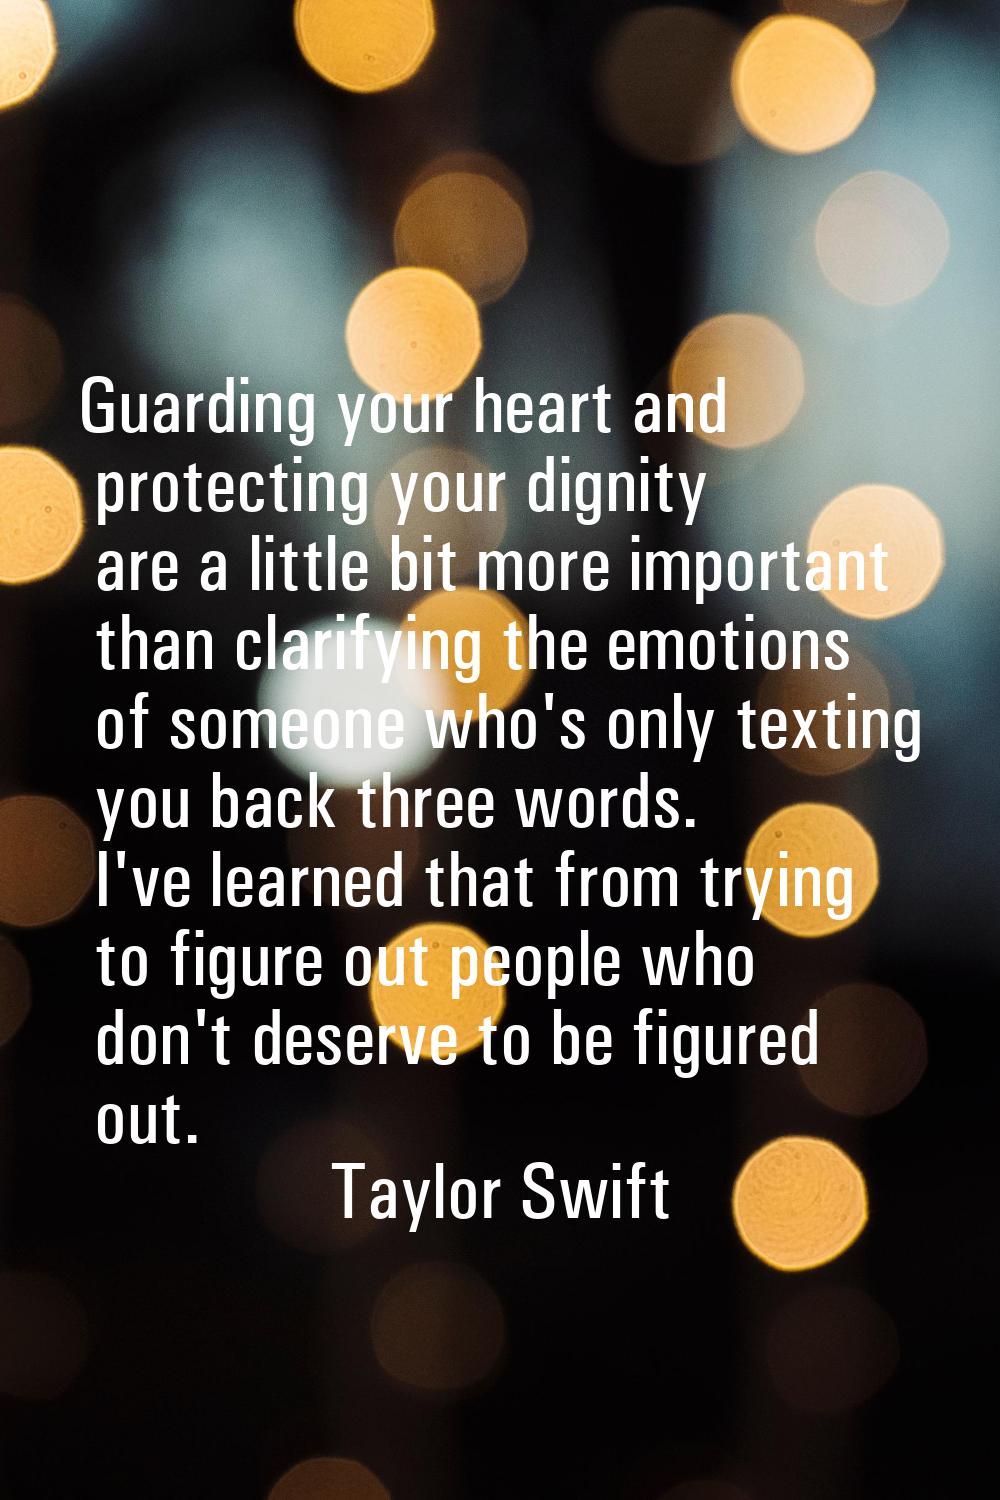 Guarding your heart and protecting your dignity are a little bit more important than clarifying the